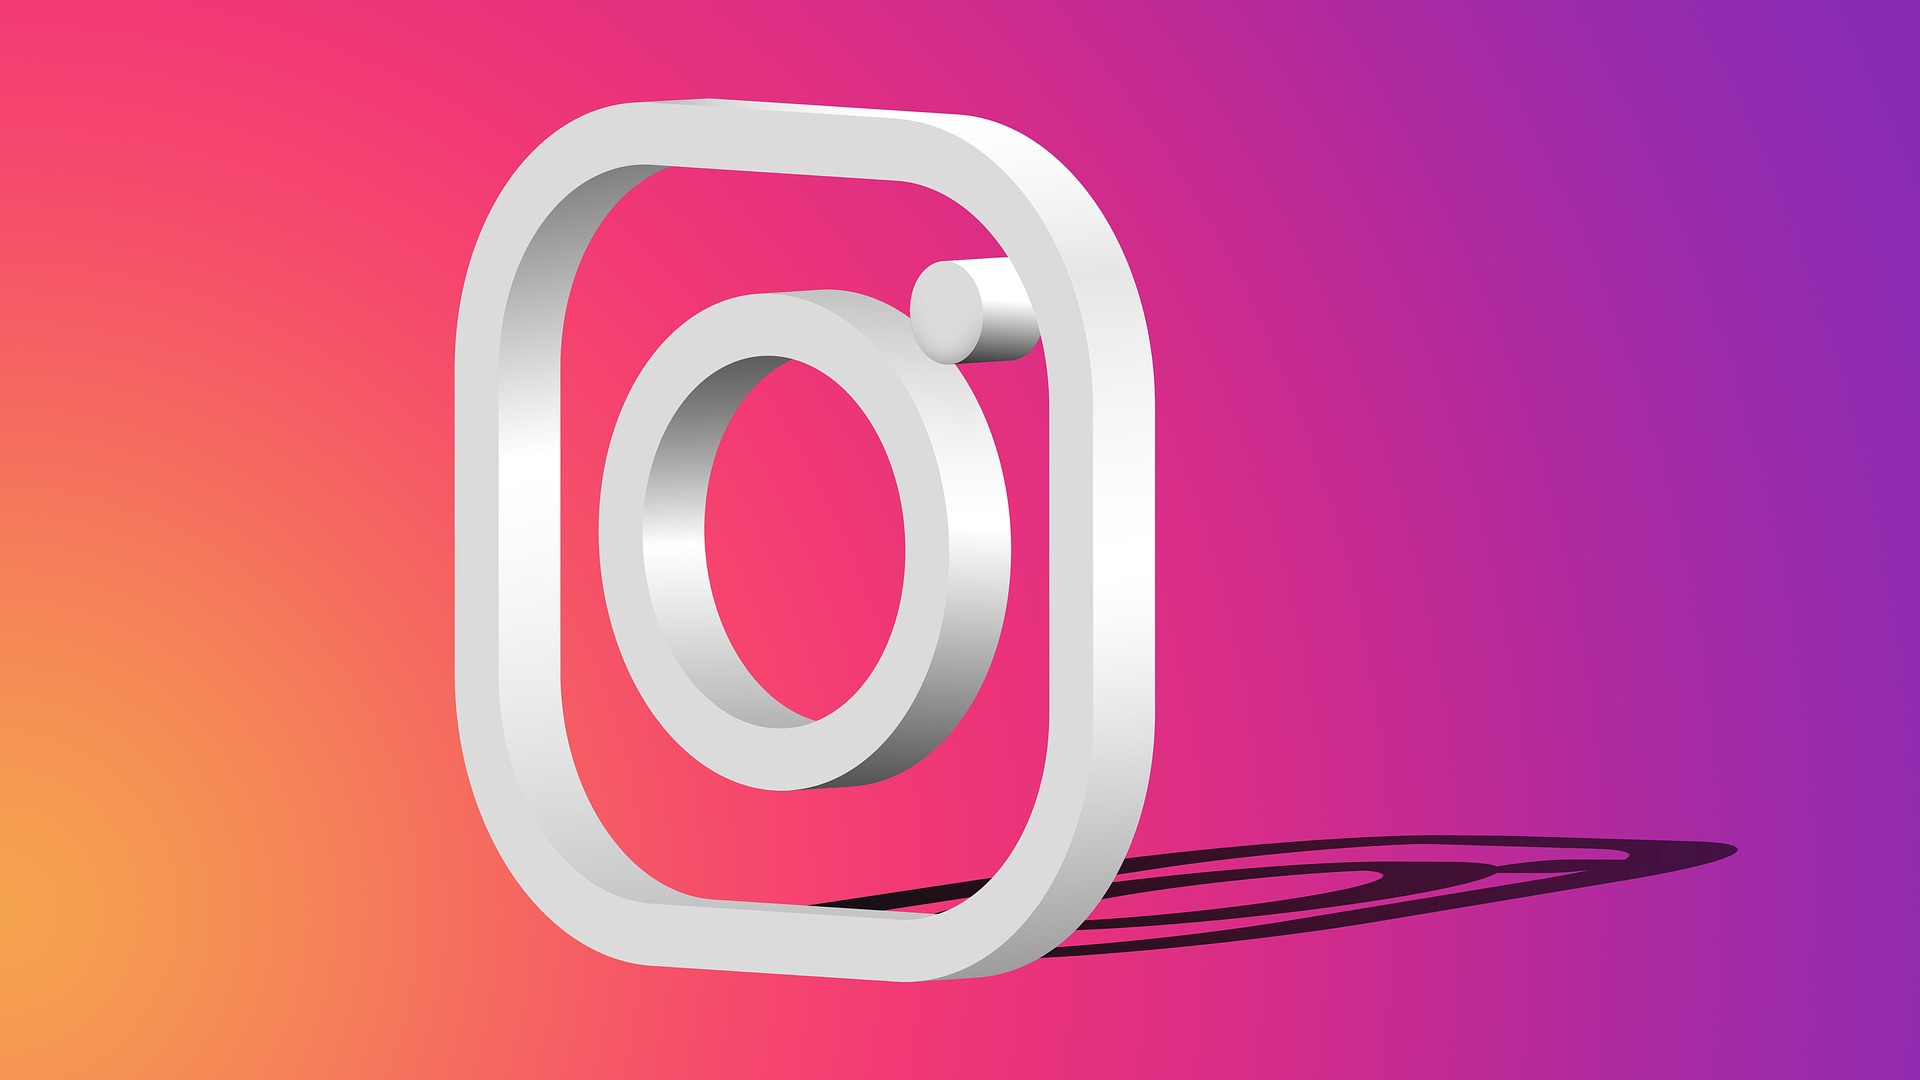 In 2022, here are some tips to help you gain more Instagram followers. - ST  Hint